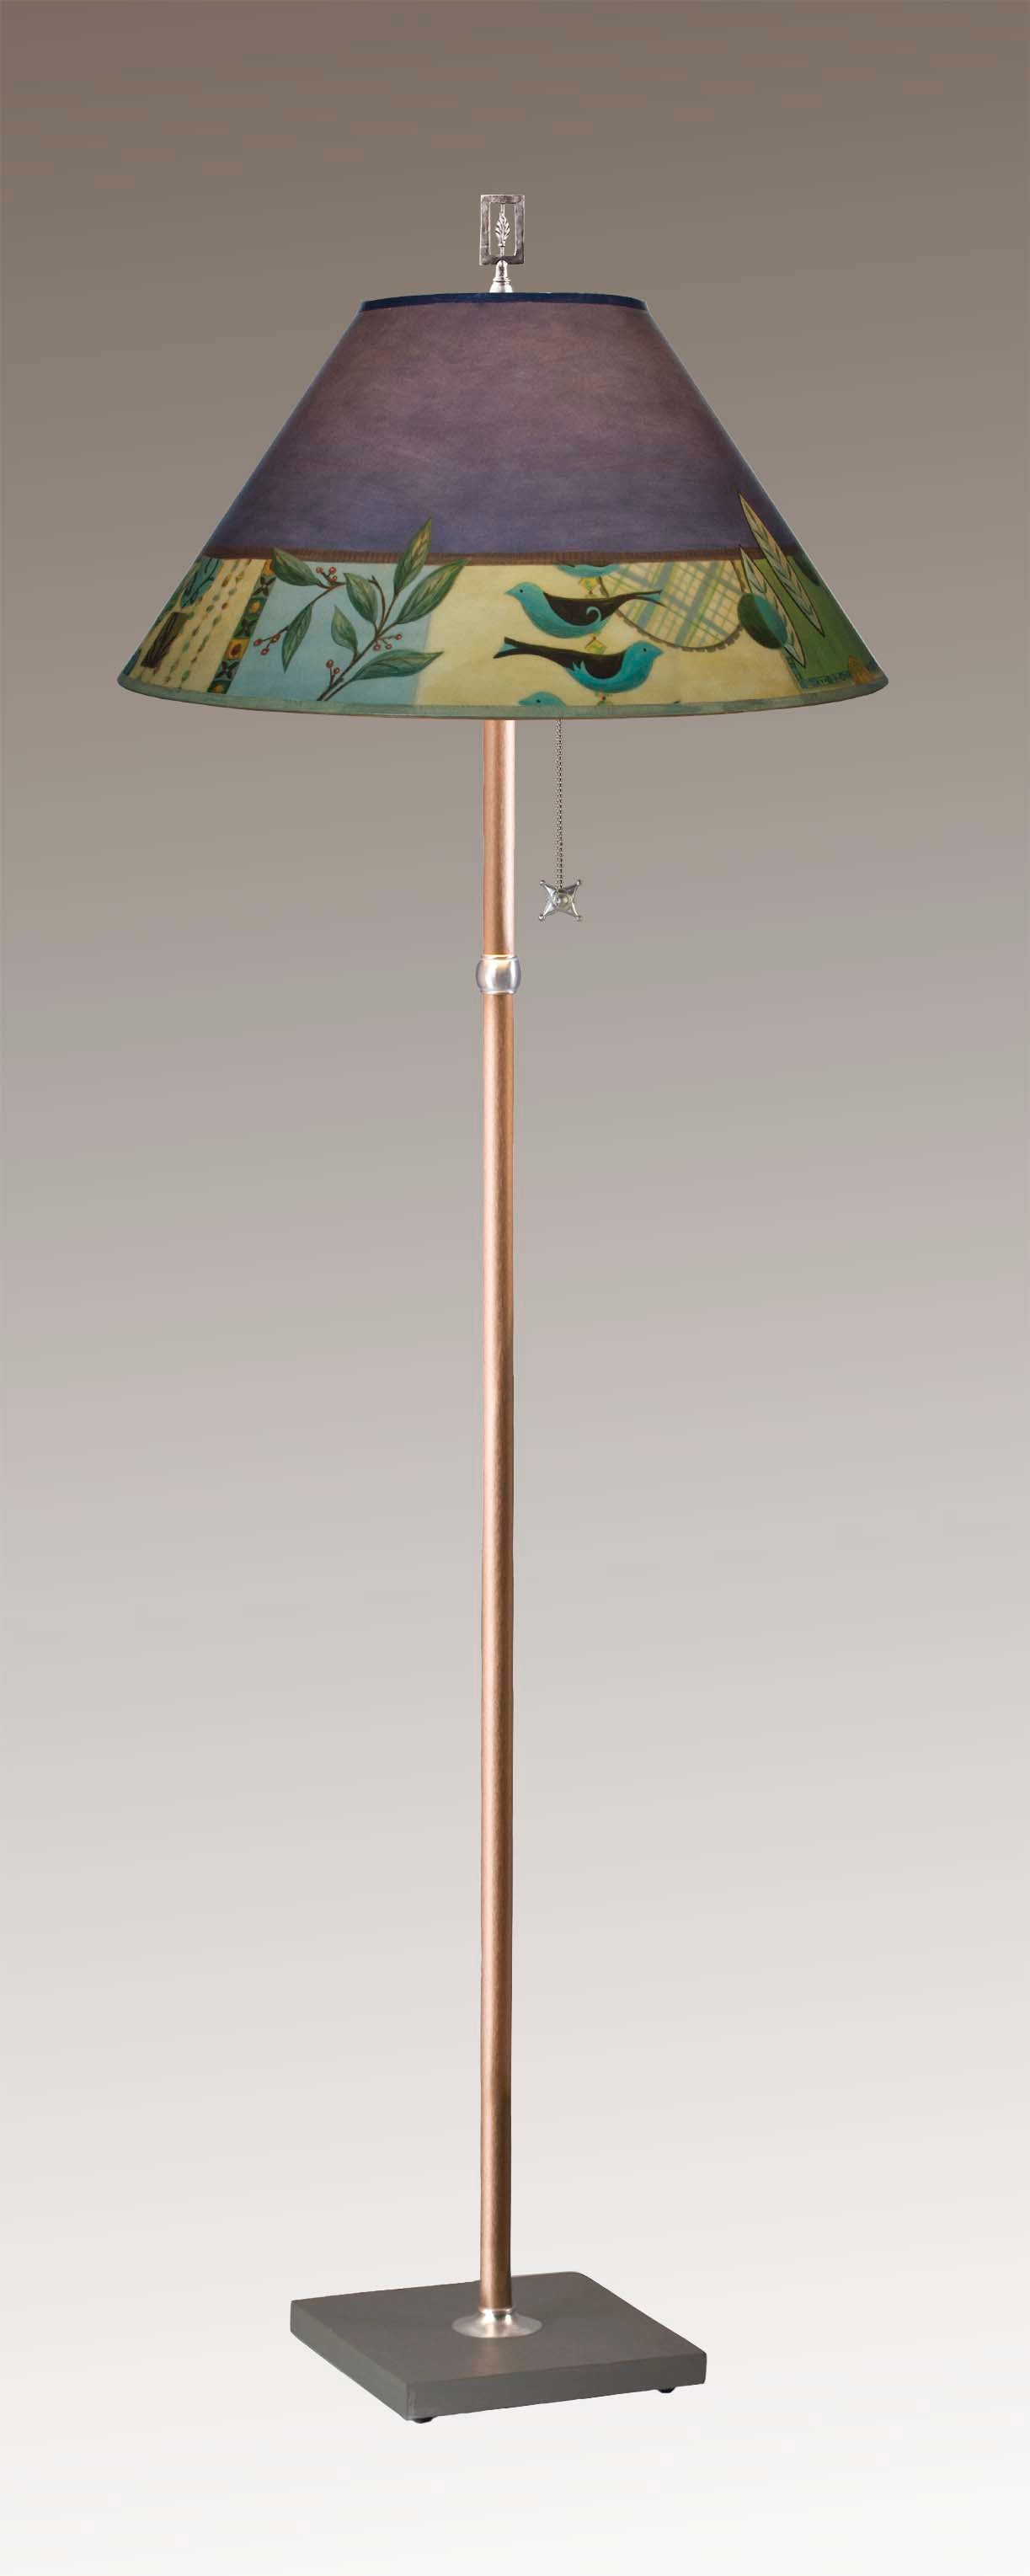 Janna Ugone & Co Floor Lamps Copper Floor Lamp with Large Conical Shade in New Capri Periwinkle